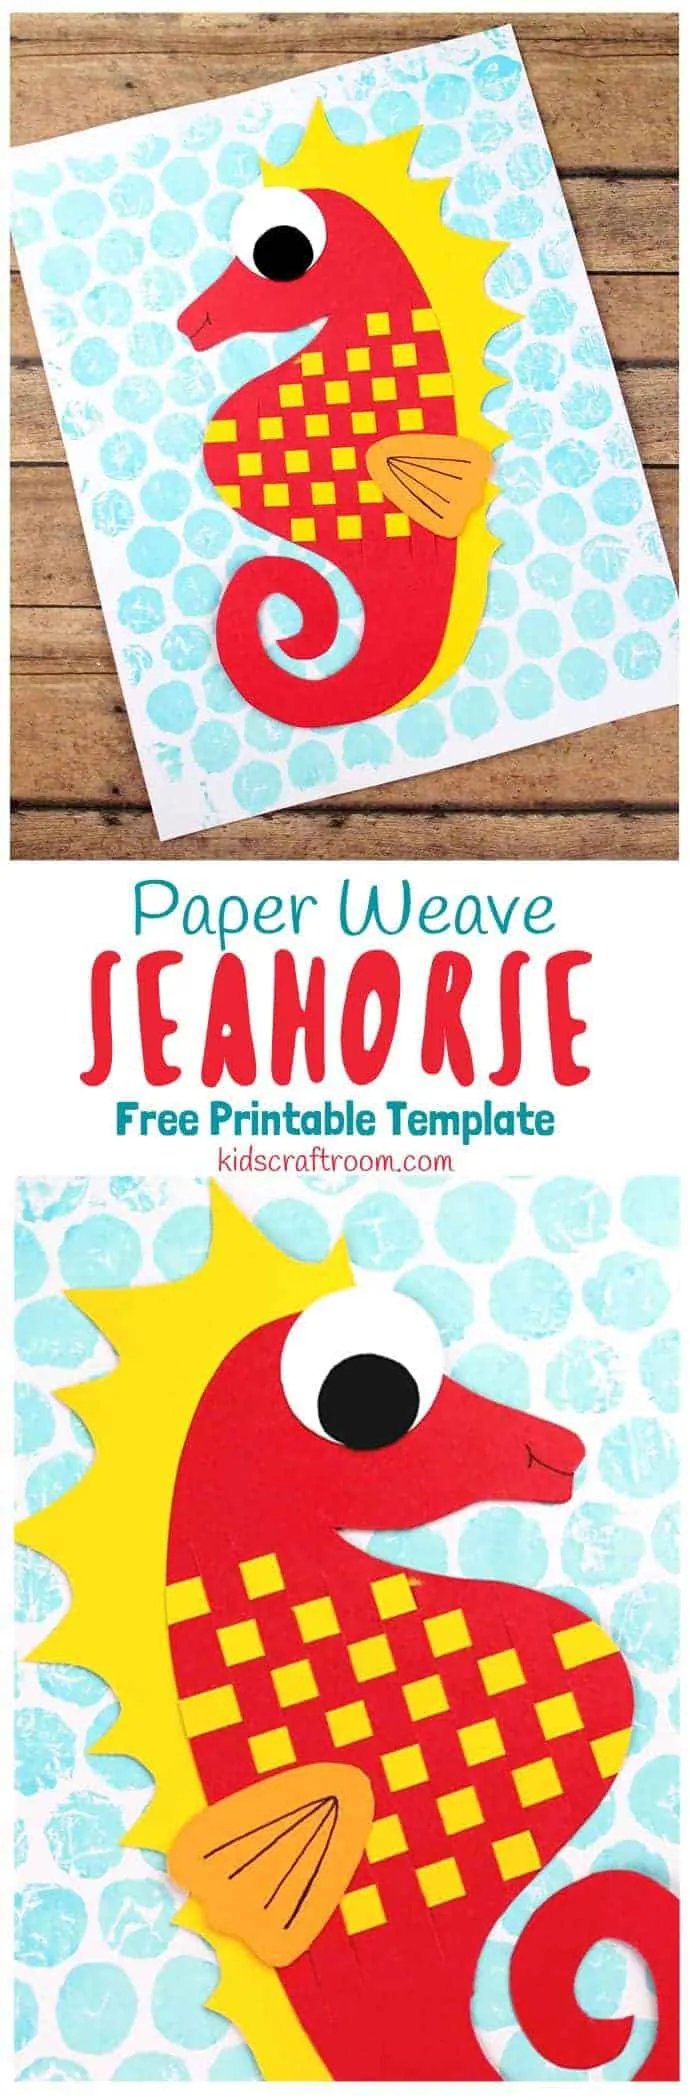 Try this gorgeous Paper Weaving Seahorse Craft. One of a three part Beach Paper Weaving Series which includes an adorable Paper Weave Fish and Paper Weave Crab too. Each craft comes with a free printable template so you can get straight to crafting with the kids. You're going to want to make them all! #seahorse #seahorsecrafts #oceancrafts #kidscrafts #papercrafts #paperweaving #printables #craftsforkids #beachcrafts #preschool #prek #ECE #kidsart #kidscraftroom